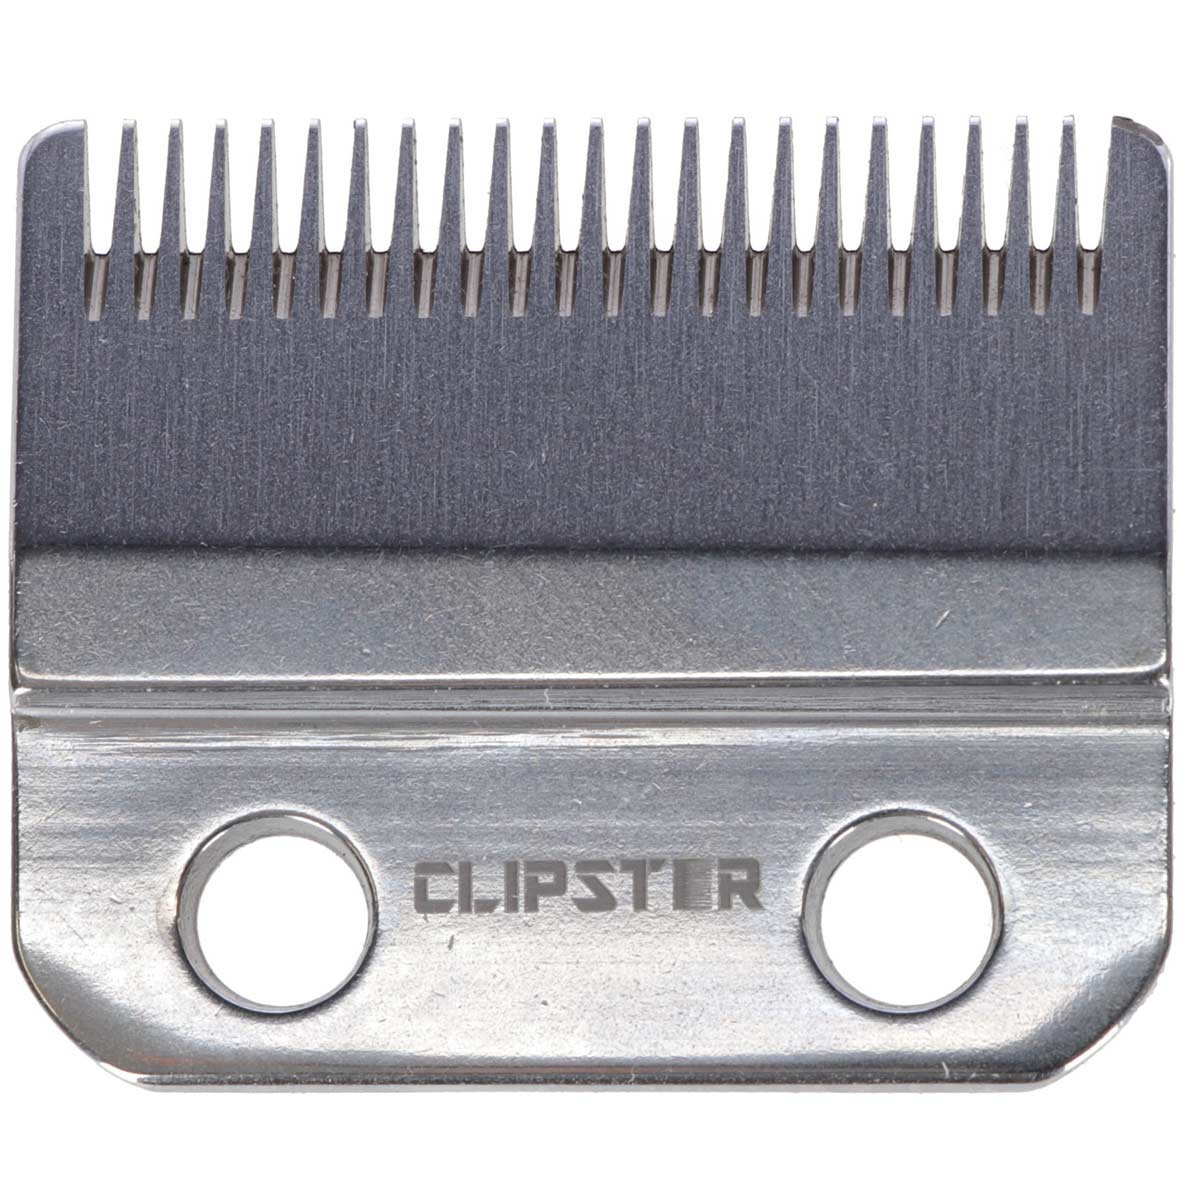 Clipster Clipper Blade for TaproX